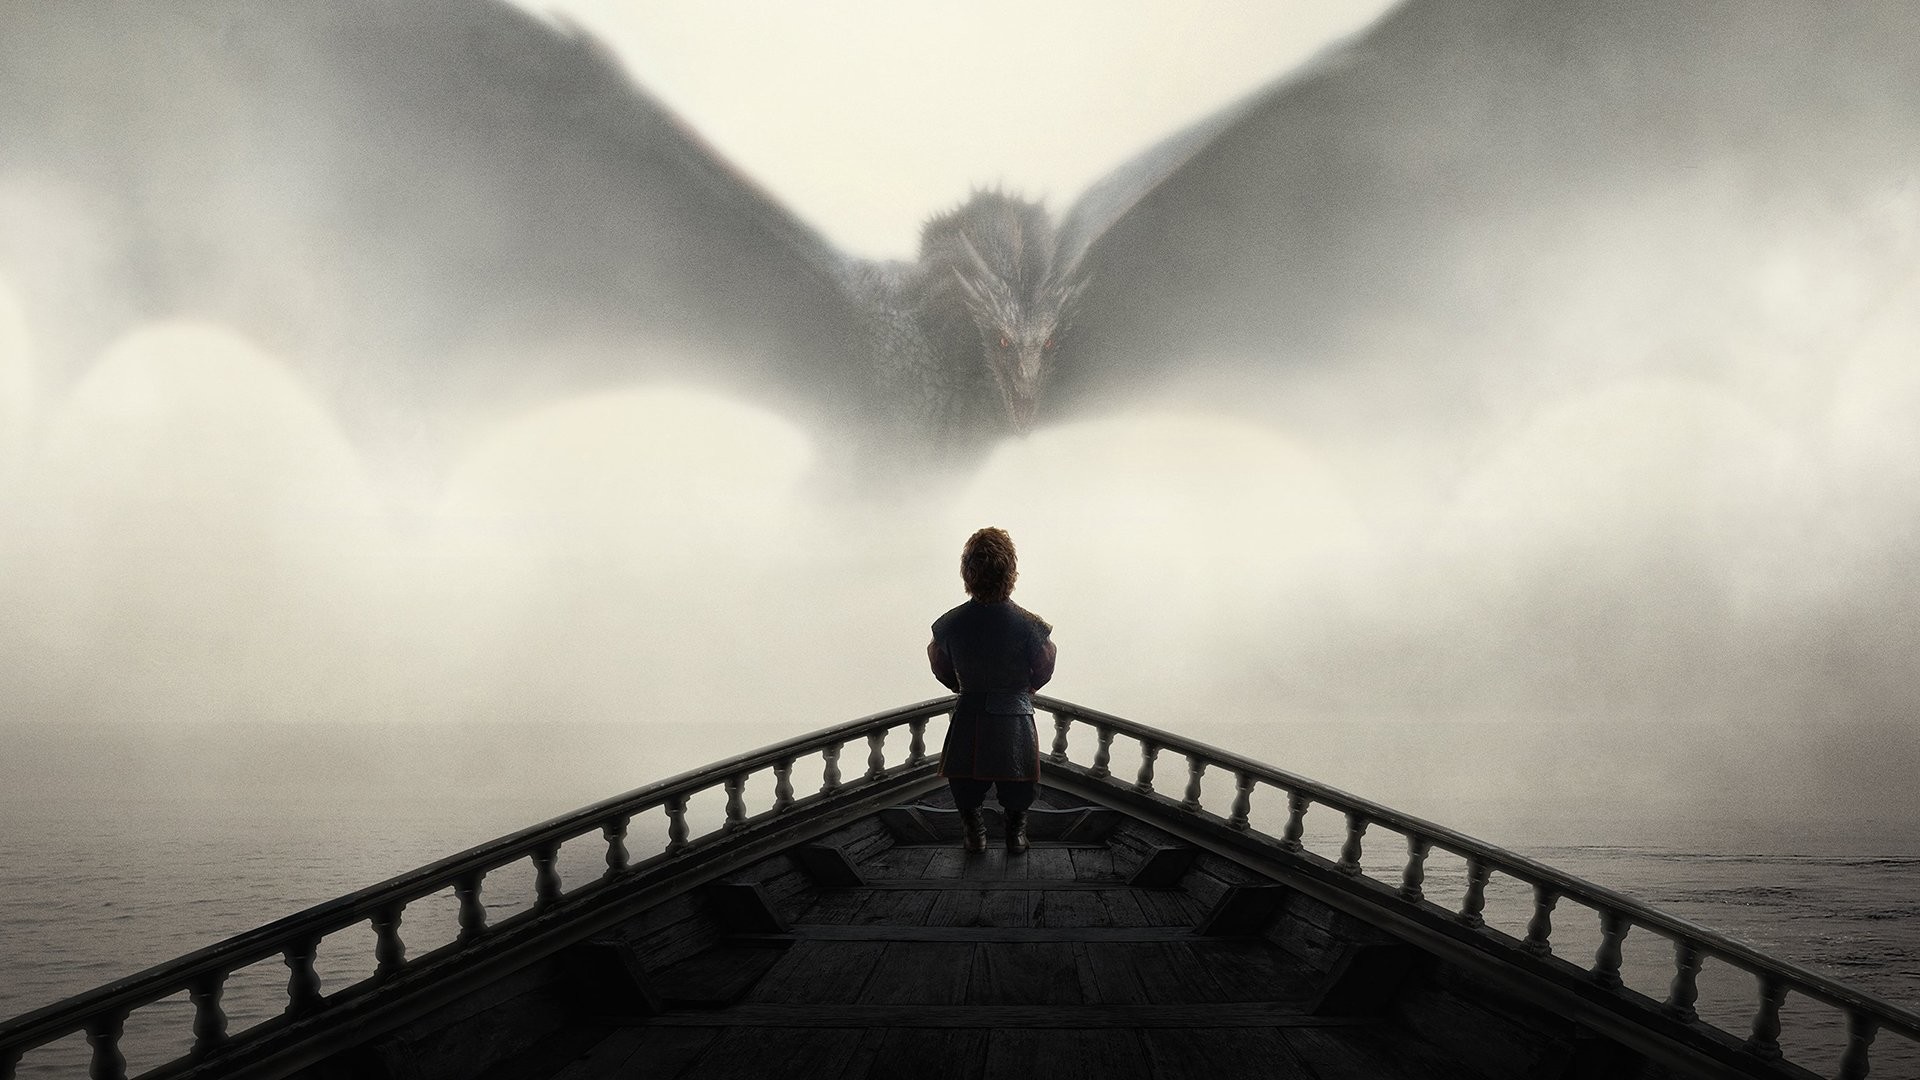 4K Game of Thrones Wallpaper (66+ images)